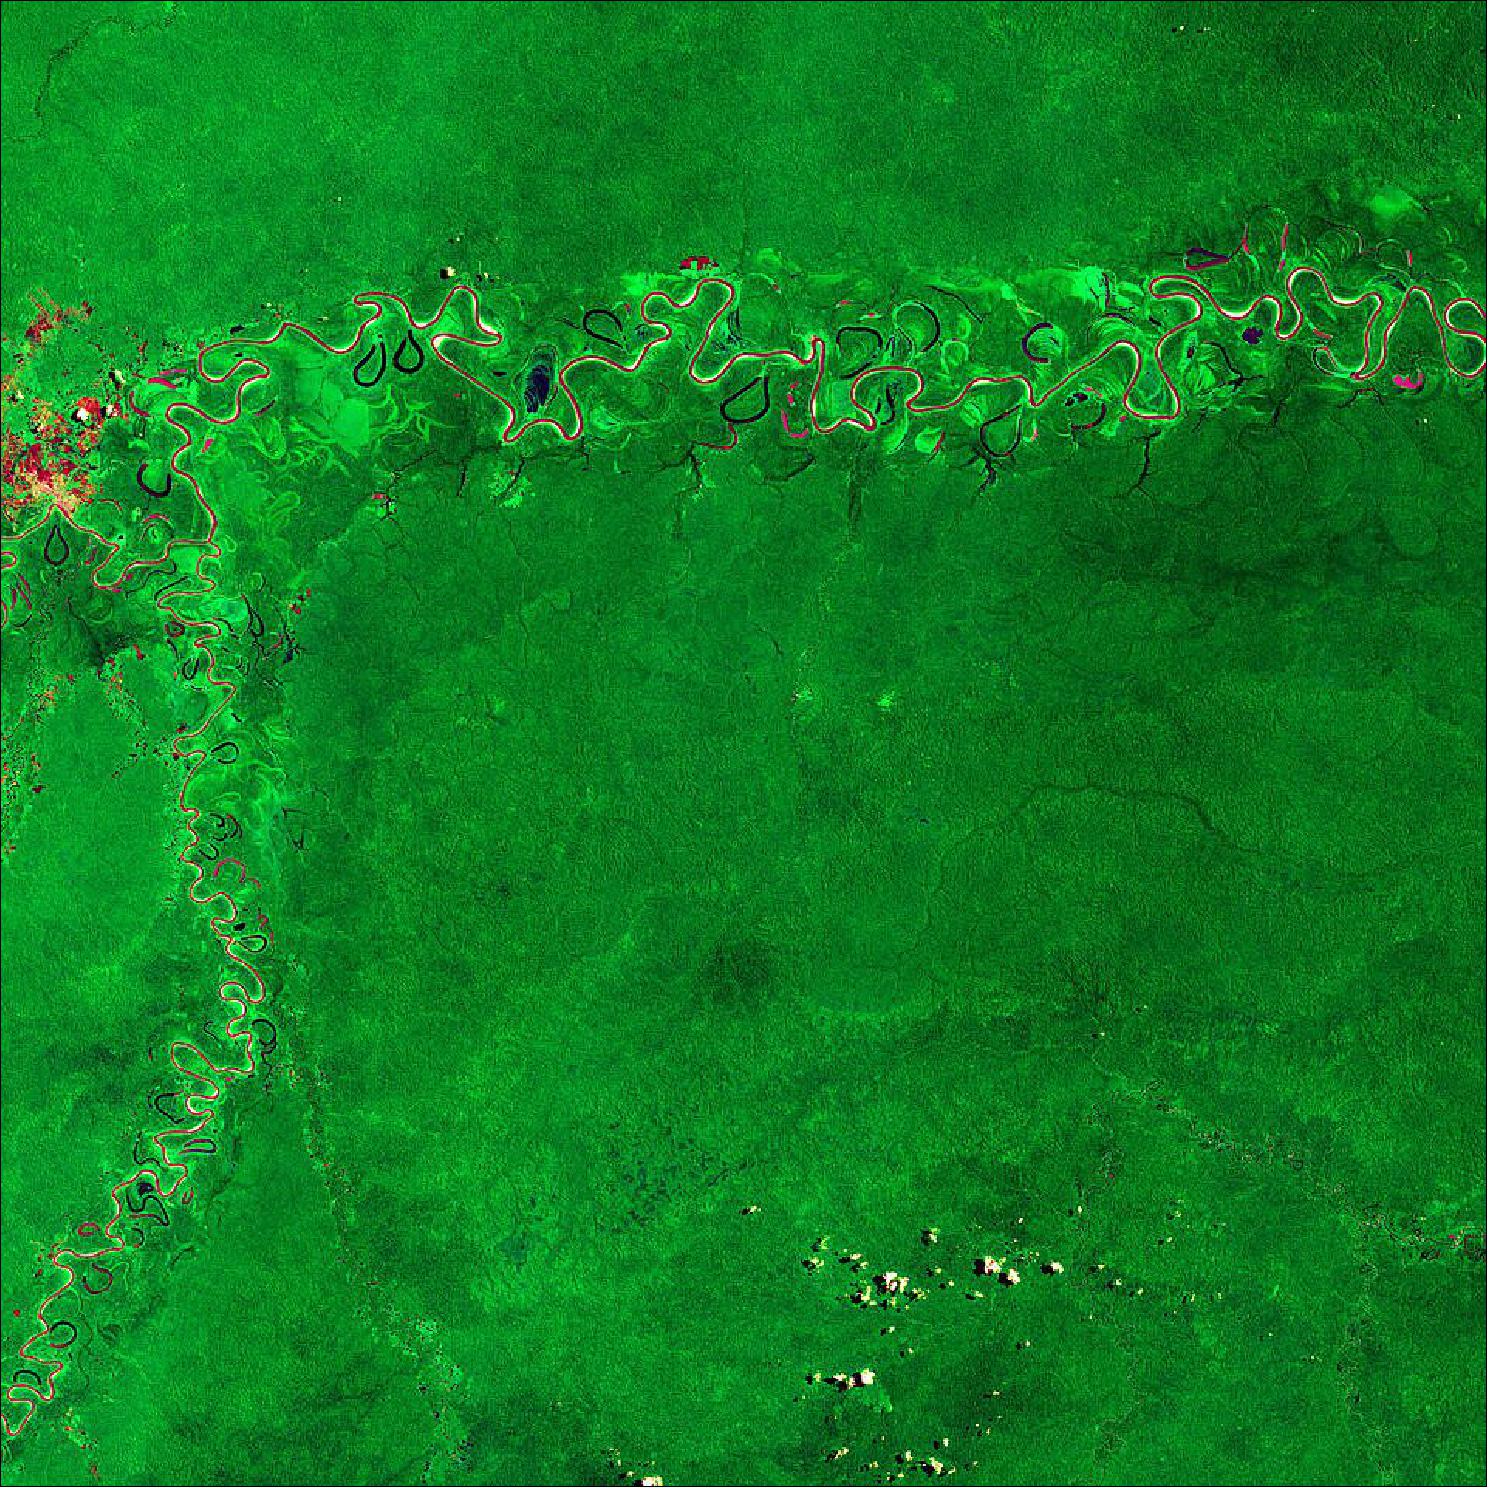 Figure 66: This image has been processed using the infrared channel of the Sentinel-2 satellite which makes the dense rainforest appear in bright green. This makes differences in vegetation coverage more evident than only using the visible channels of the satellite that our eyes are able to see. In this image, the Juruá River, the most-winding river in the Amazon basin, is visible. The river appears in shades of maroon and magenta as the reflected sunlight from the water’s surface consists of a mix of mainly blue and green, while the reflection in the near infrared is almost zero – leading to the colors we see here. This image is also featured on the Earth from Space video program (image credit: ESA, the image contains modified Copernicus Sentinel data (2019), processed by ESA, CC BY-SA 3.0 IGO)